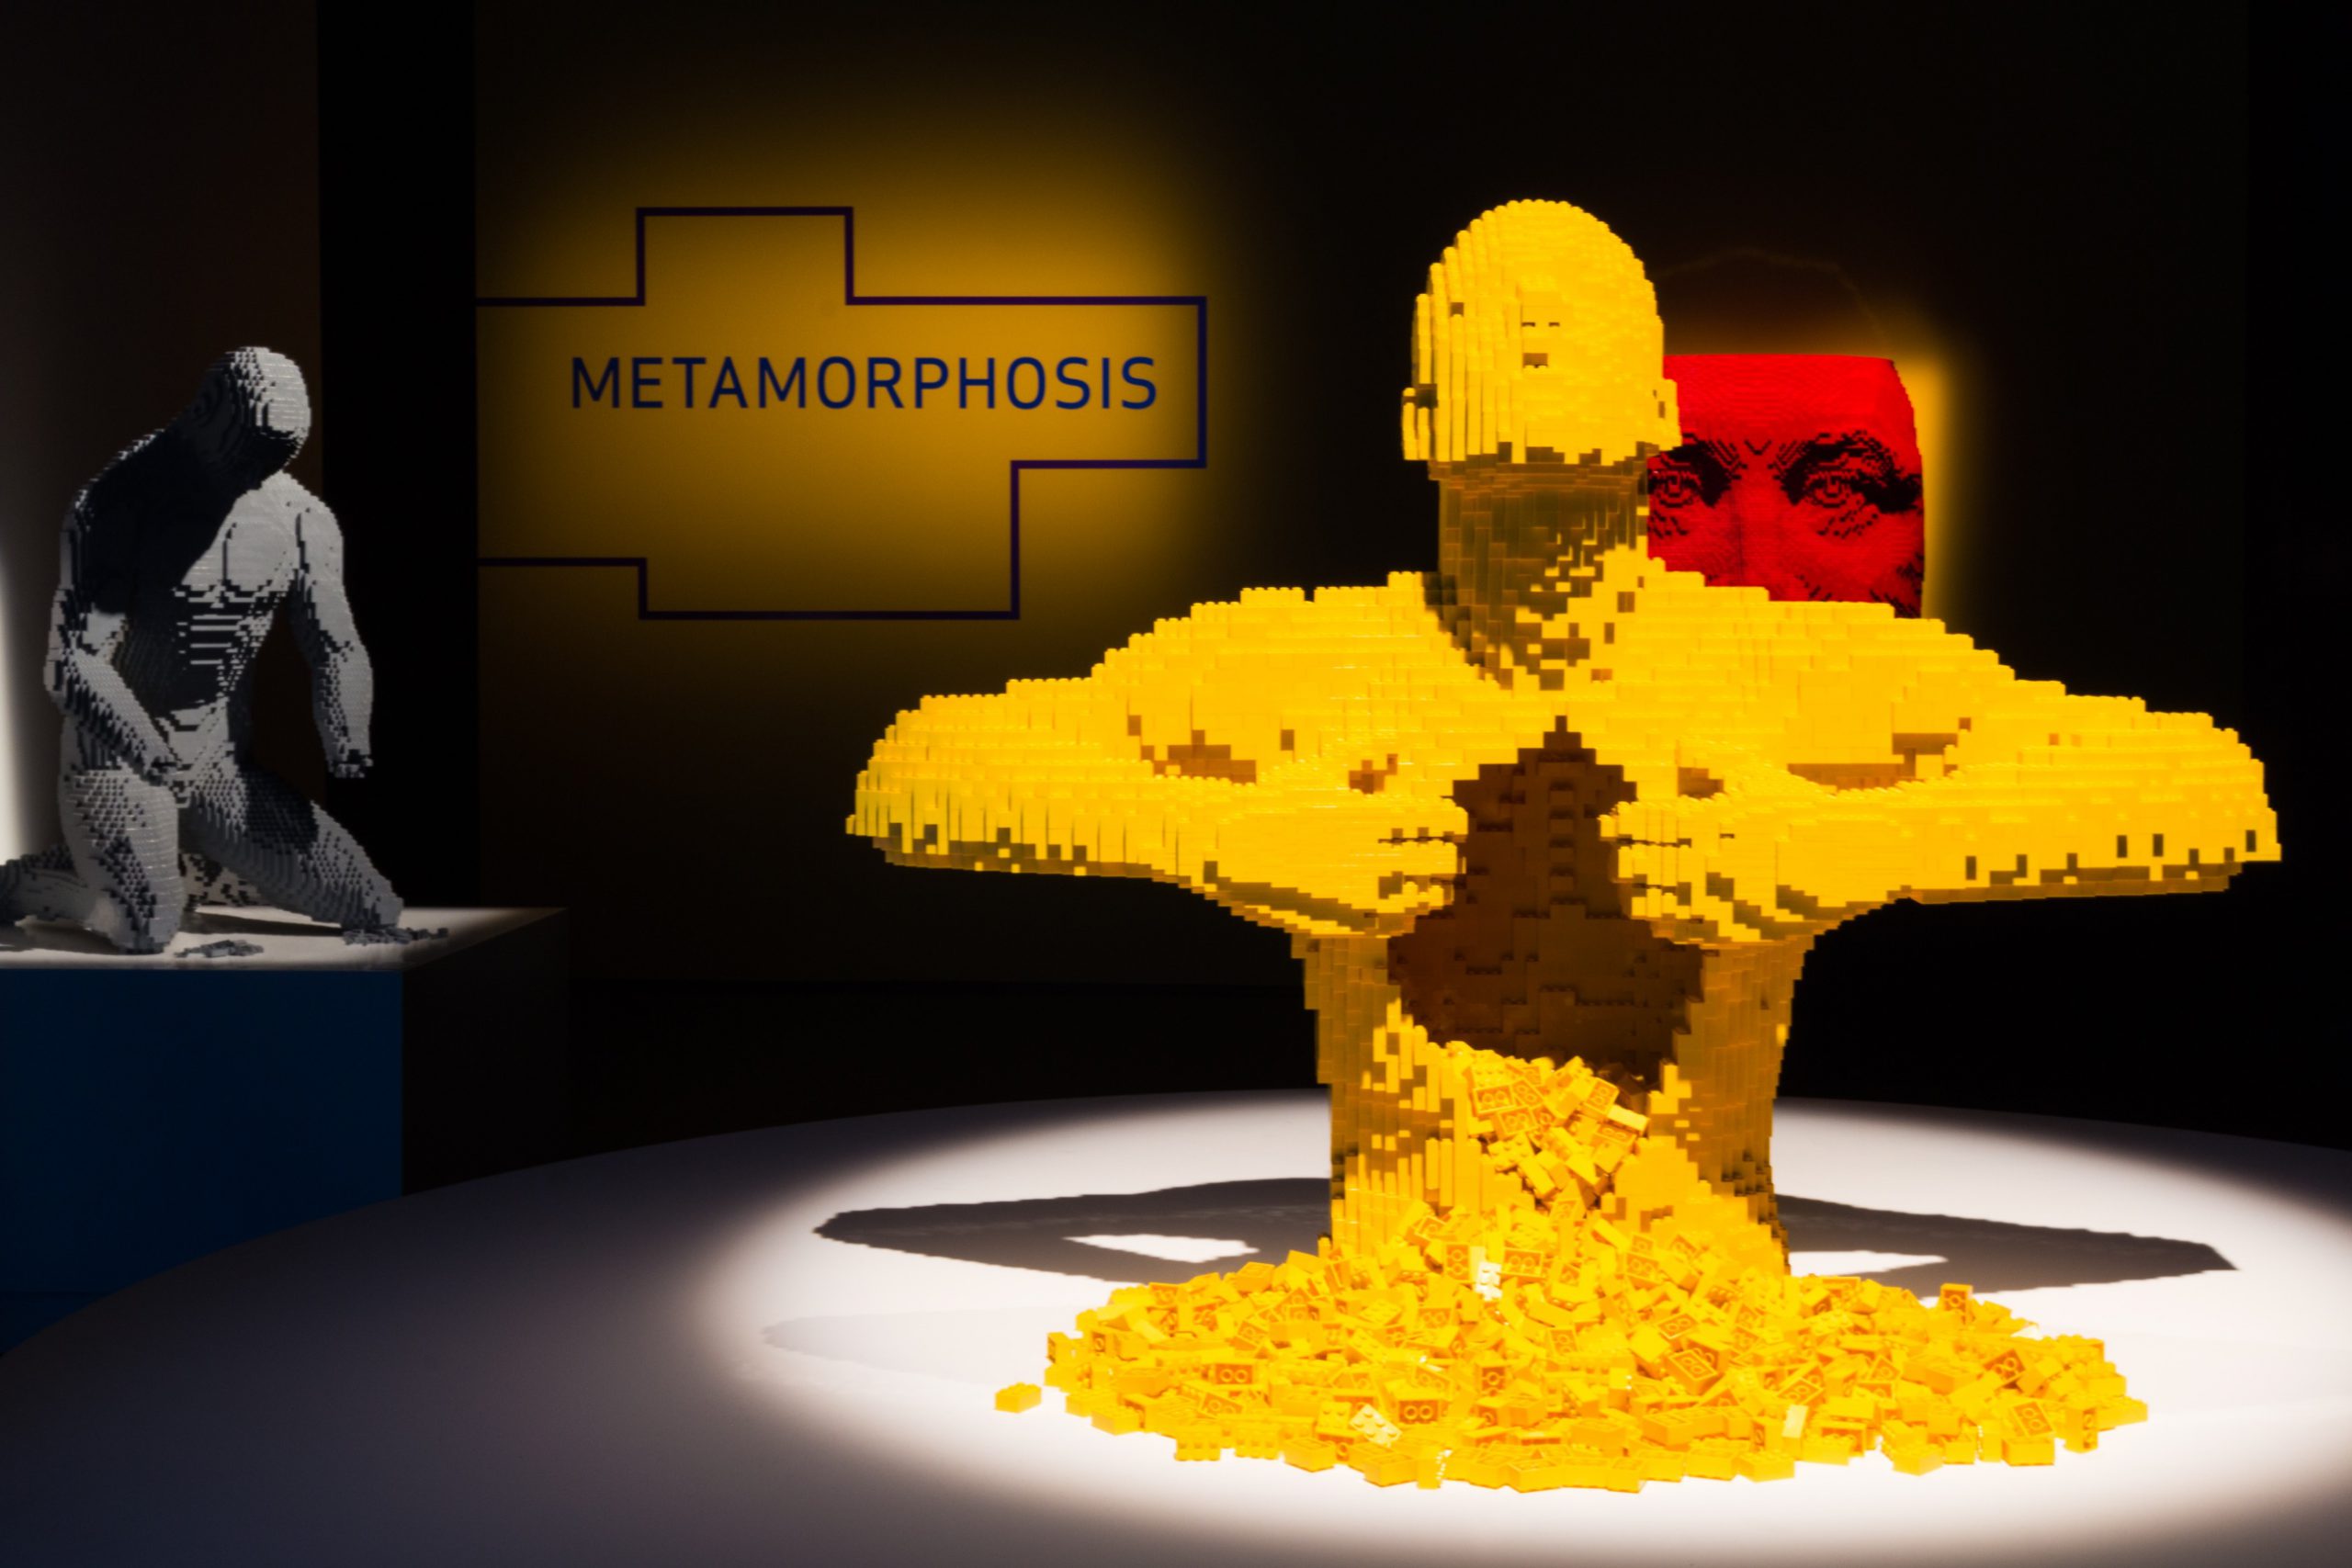 Project Image for Art of The Brick Museum